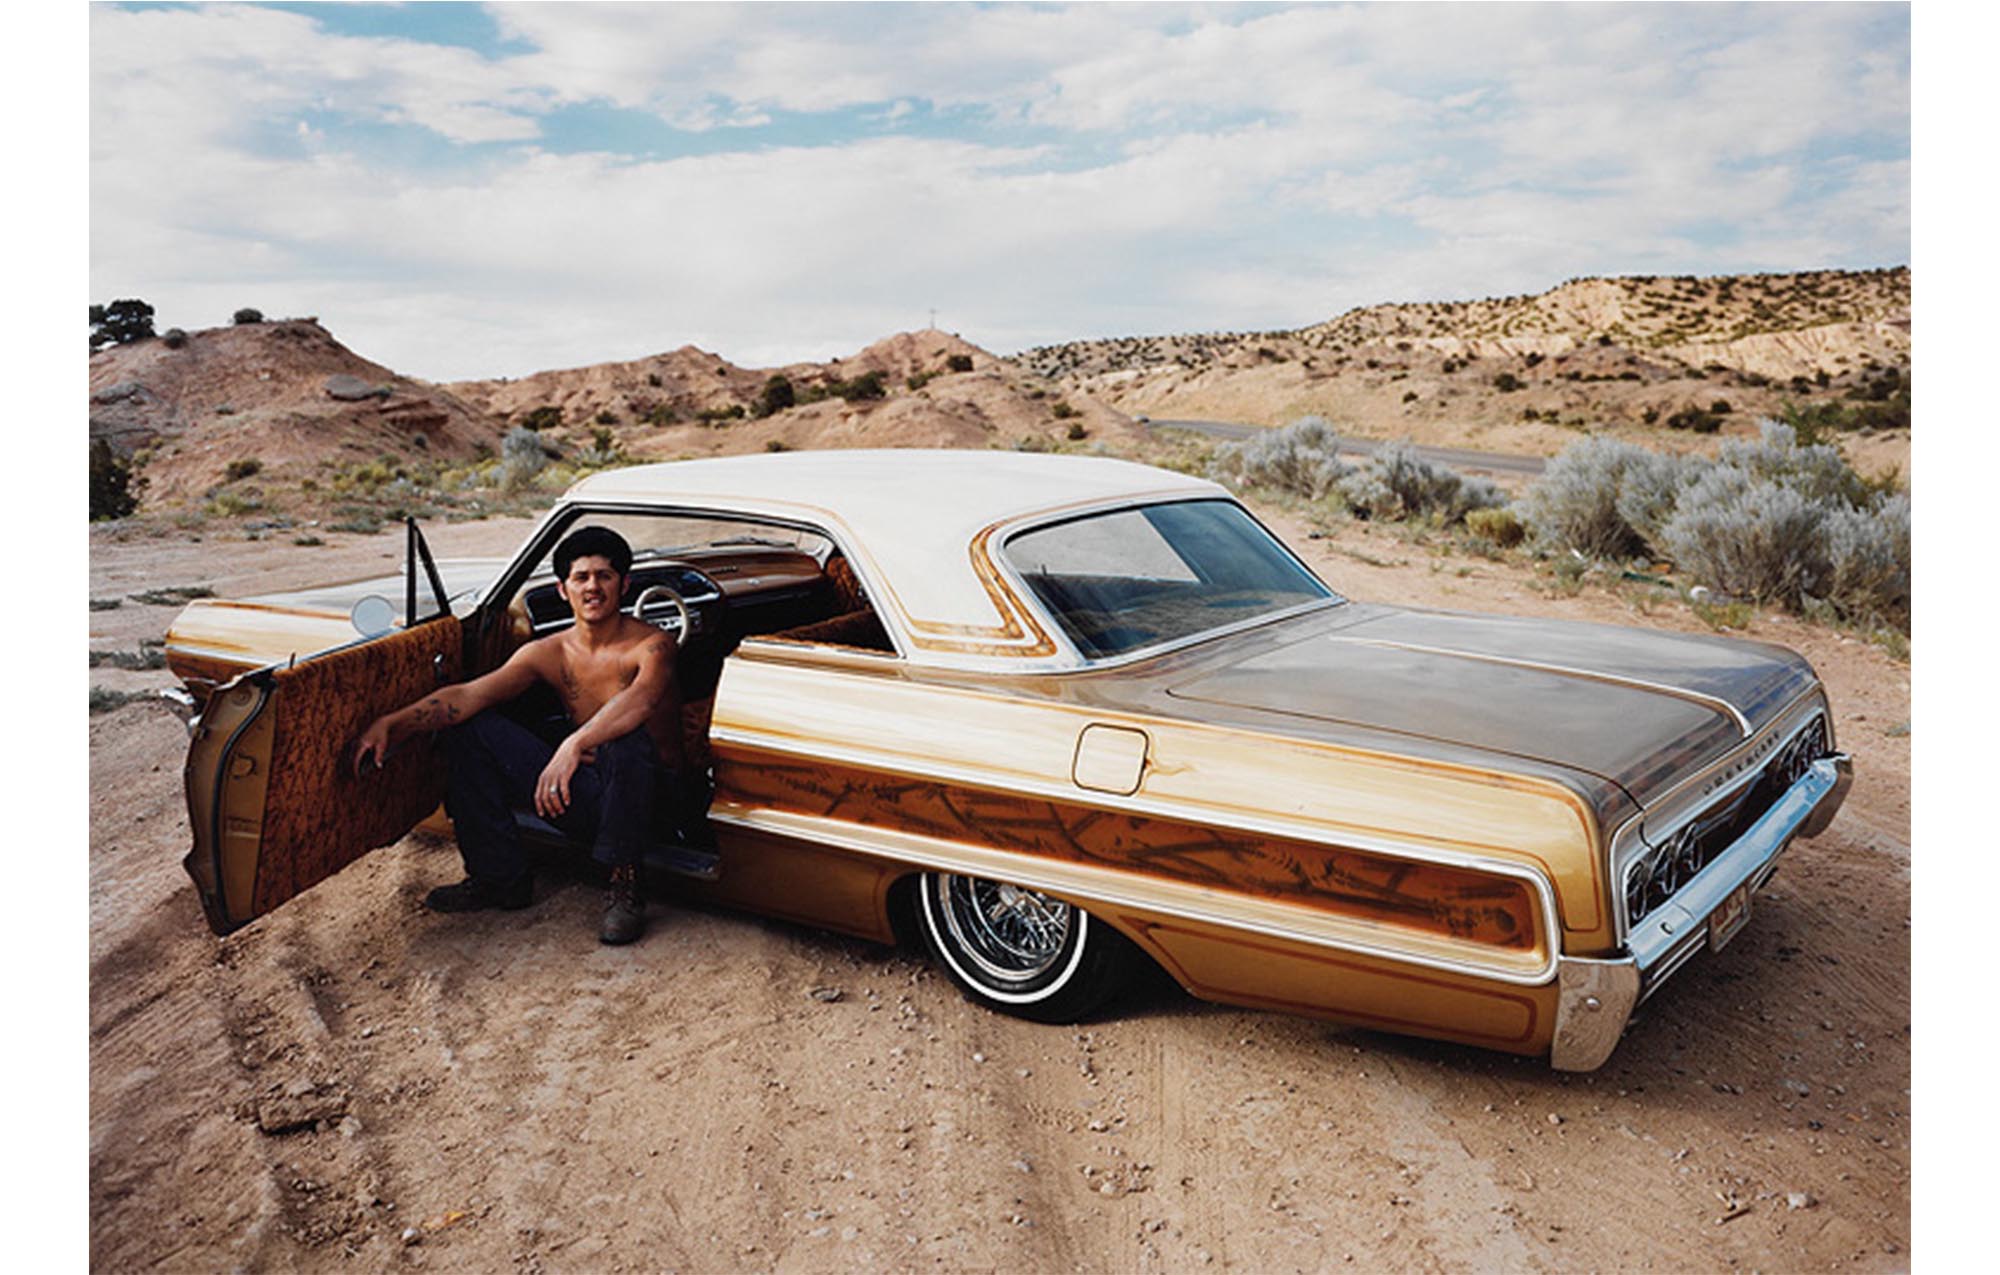 desert, low hills and scrubby growth, gold sedan with white top and bronze design in foreground, bare chested young man in blue jeans sitting in driver's seat